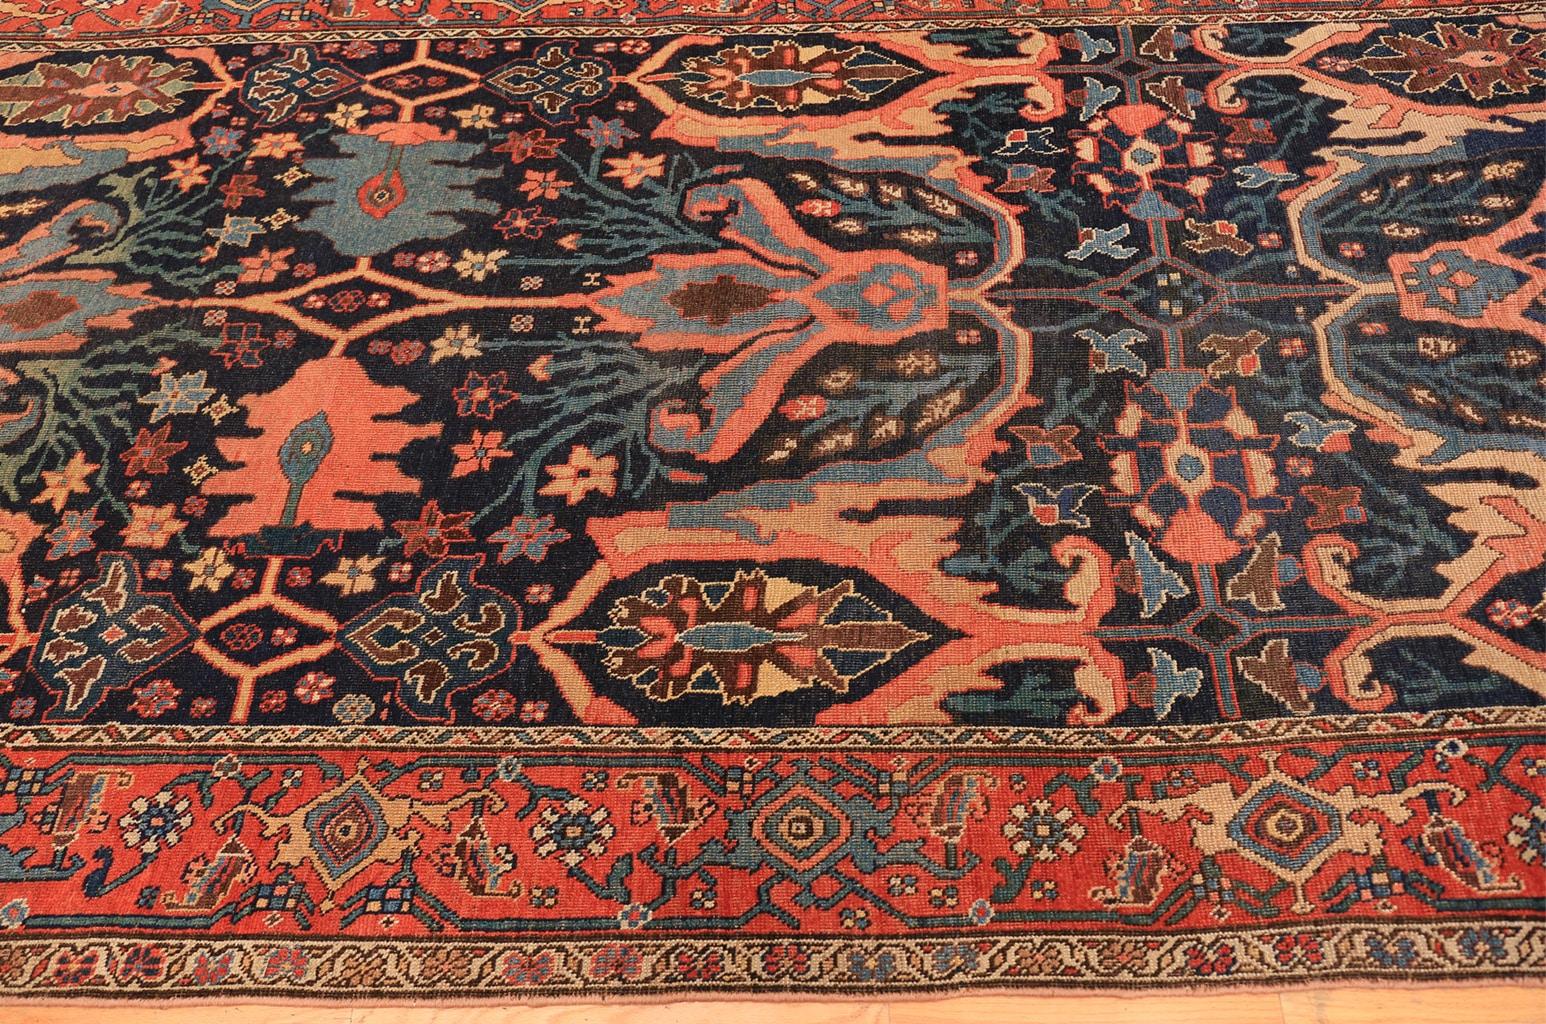 Blue background antique Persian Bidjar rug, origin: Persia, circa late 19th century. Size: 5 ft 2 in x 11 ft 7 in (1.57 m x 3.53 m)

Here is an absolutely gorgeous antique oriental rug, a truly beautiful Bidjar composition exhibiting all of the